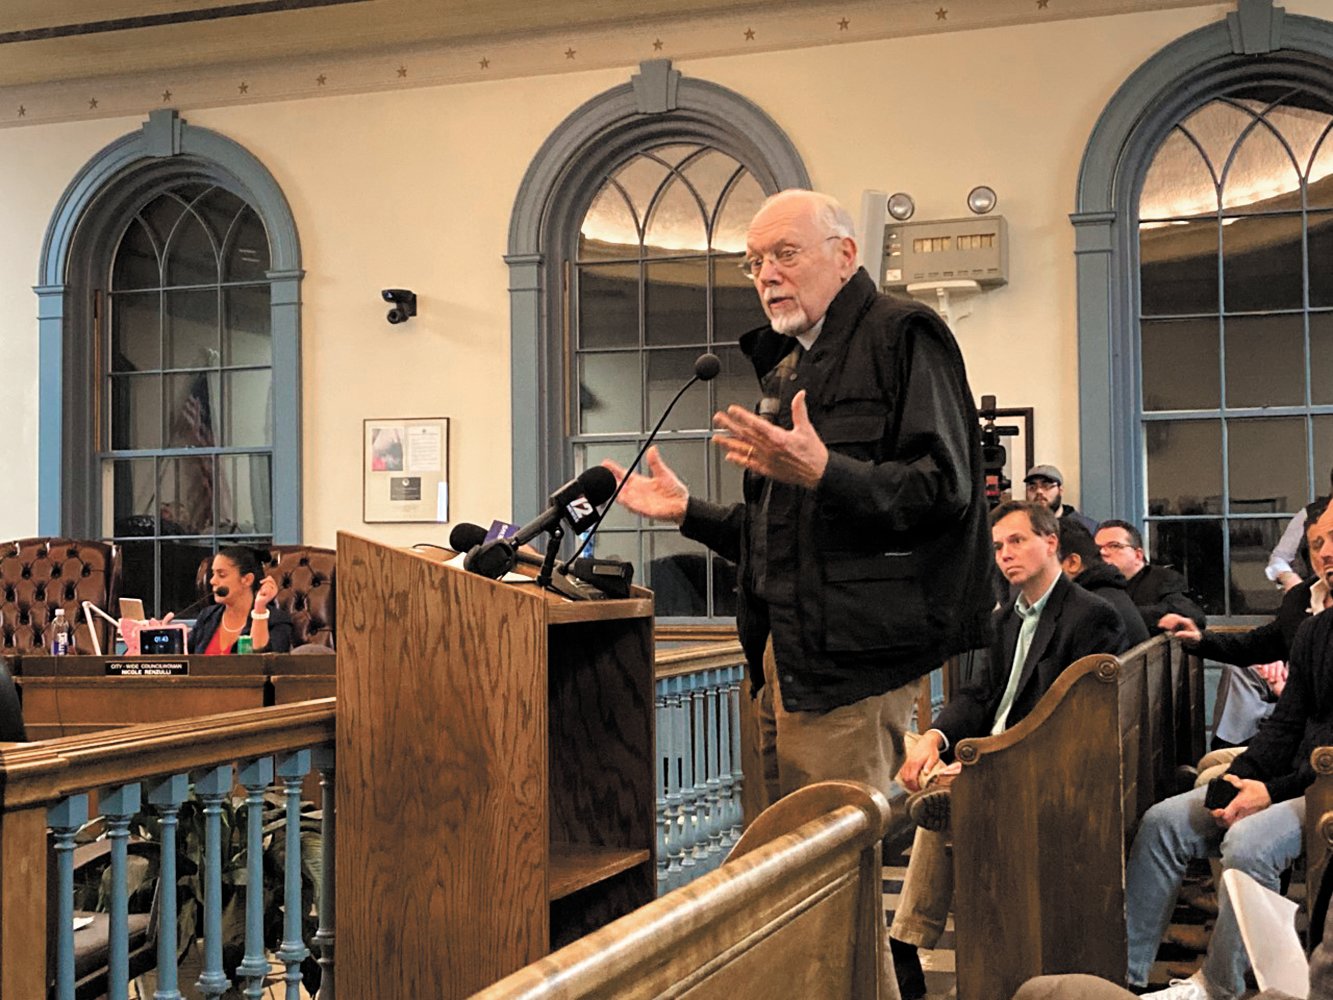 PERSONAL ANECDOTE: Pastor Dr. Duane Clinker of Mathewson Street United Methodist Church spoke about the pallet shelter resolution at Thursday’s special Safety Services and Licenses Committee meeting. He talked about having breakfast each Sunday with 200 individuals experiencing homelessness. He said how heartbreaking see homeless children. (Herald photo)